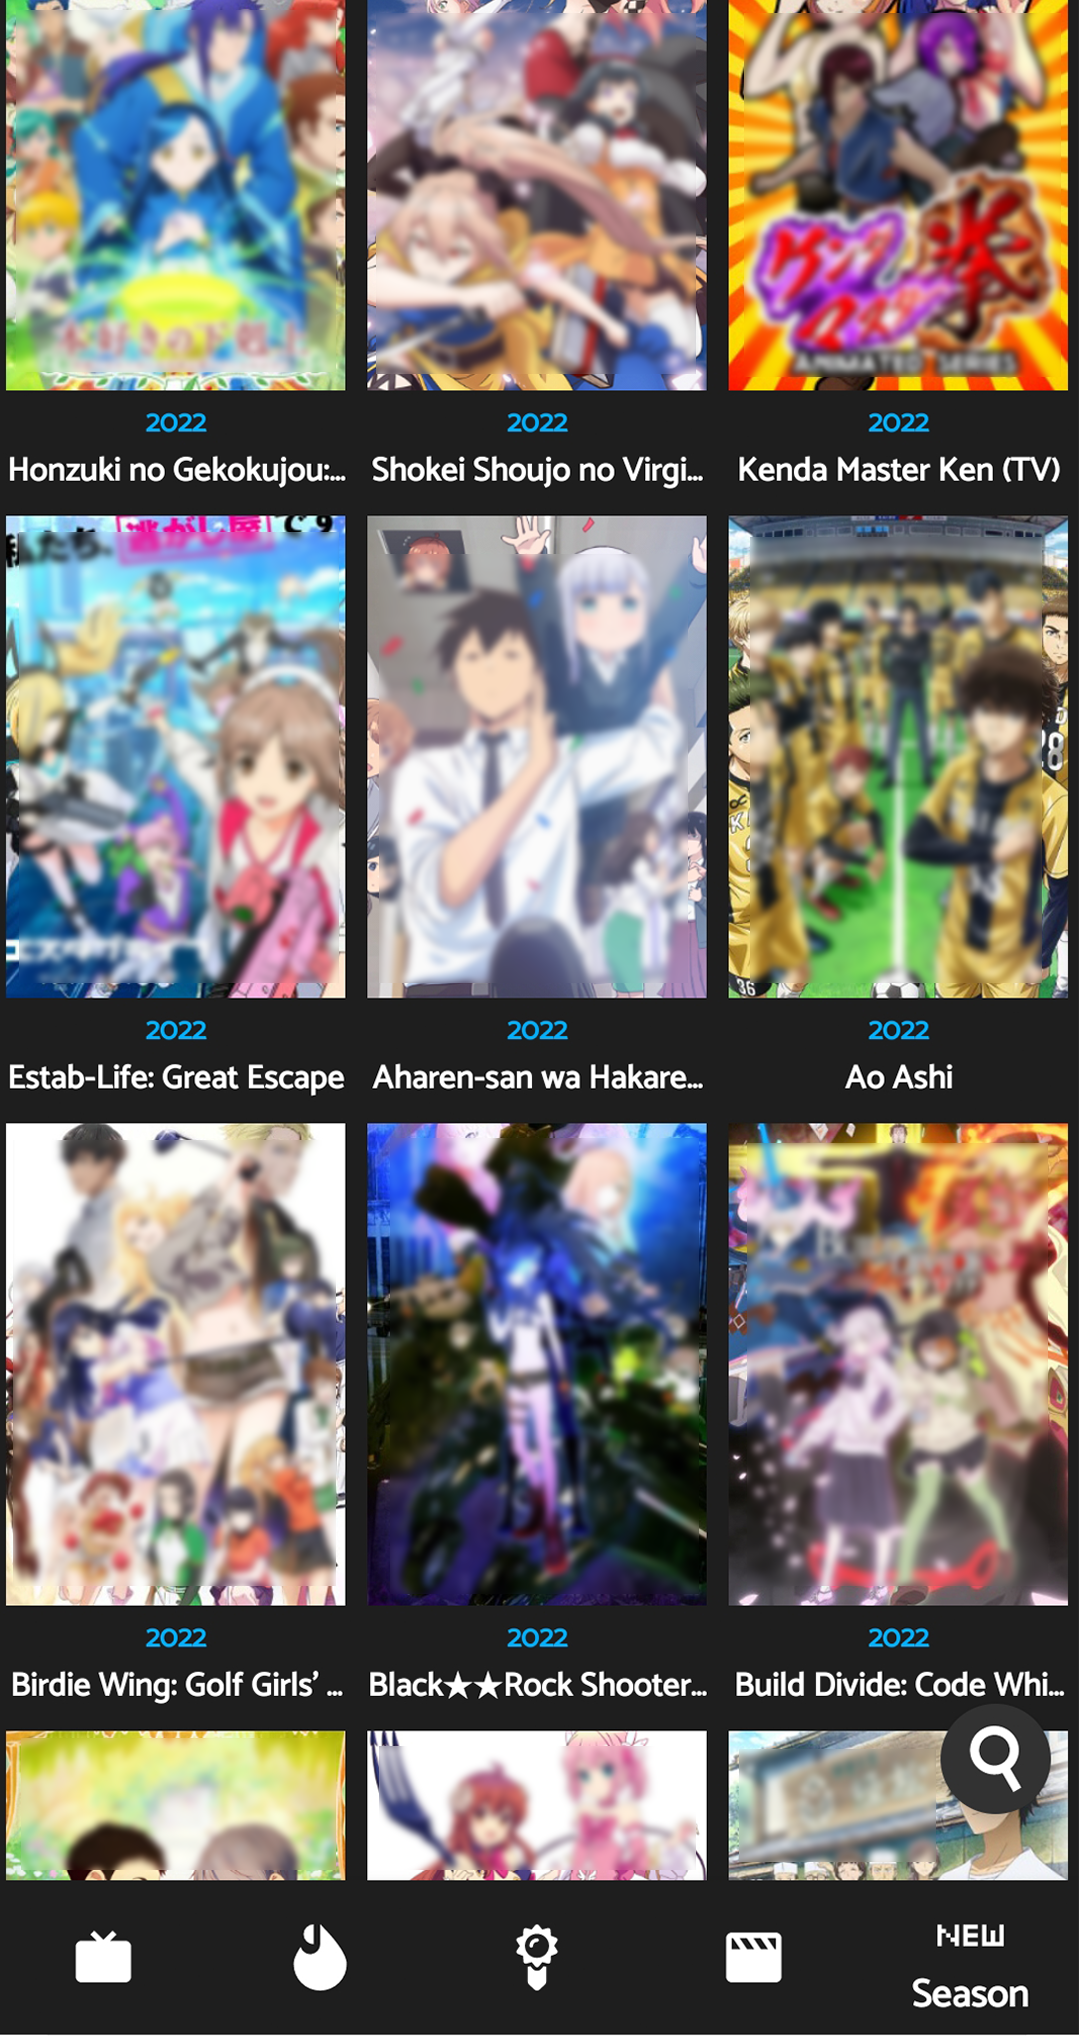 AnimeSuge: HD Anime Online APK (Android App) - Free Download